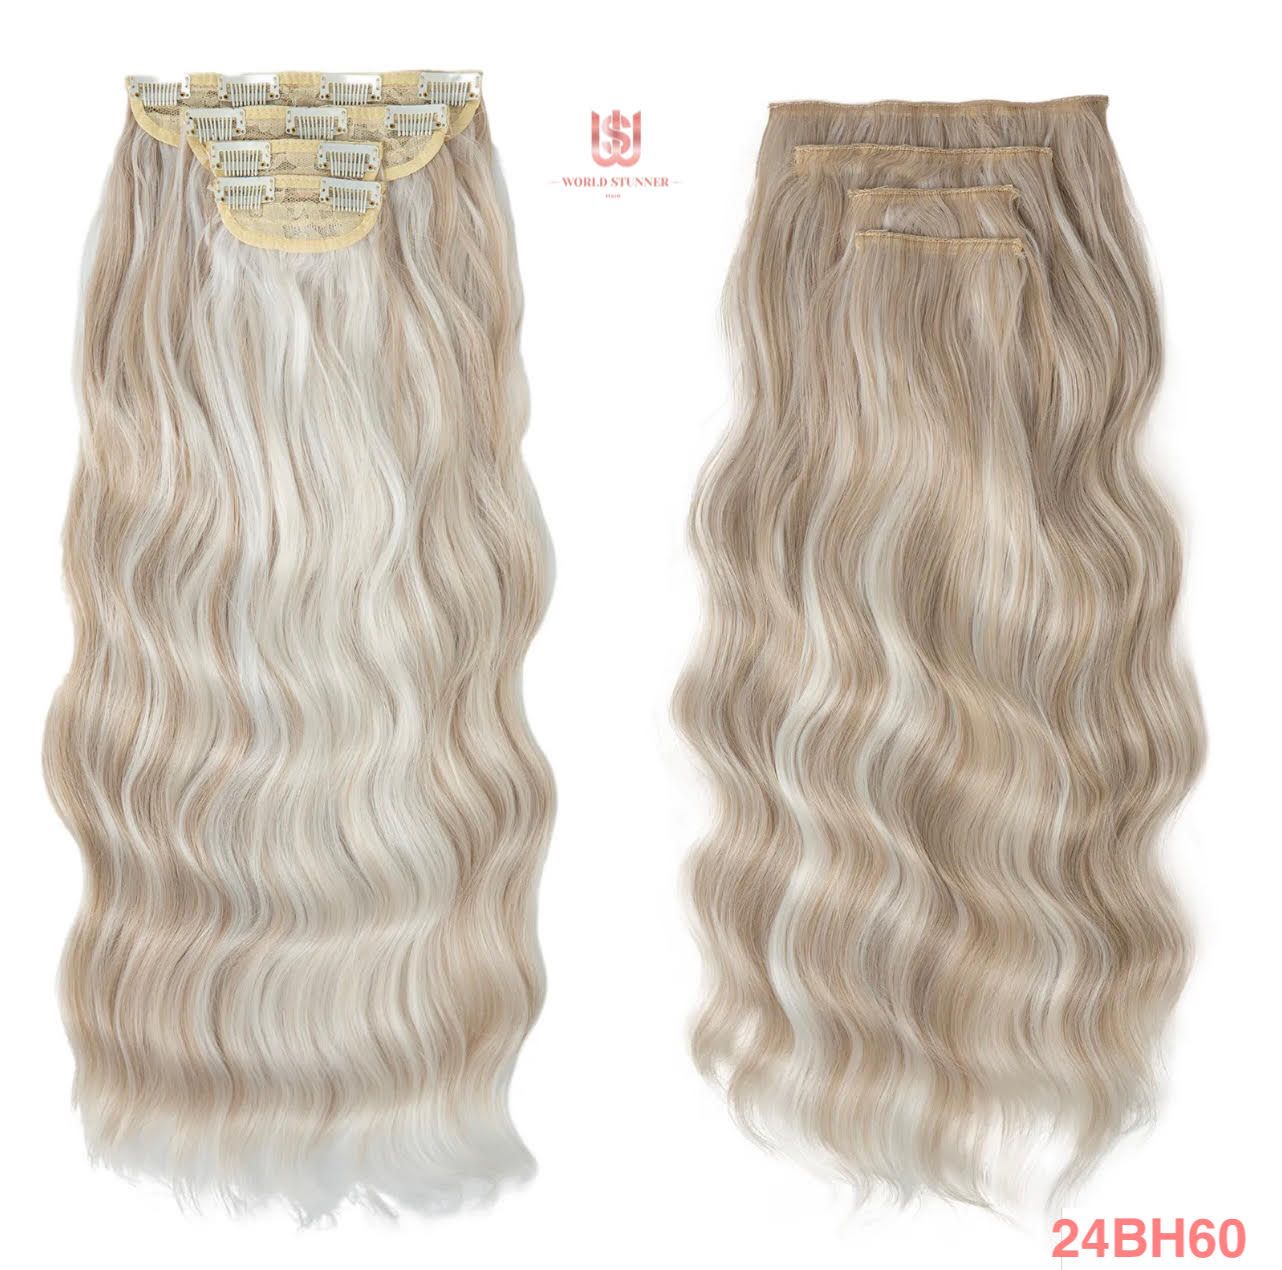 24BH60 - SUPER THICK 22” 4 PIECE WAIST Length WAVE CLIPS IN HAIR Extensions